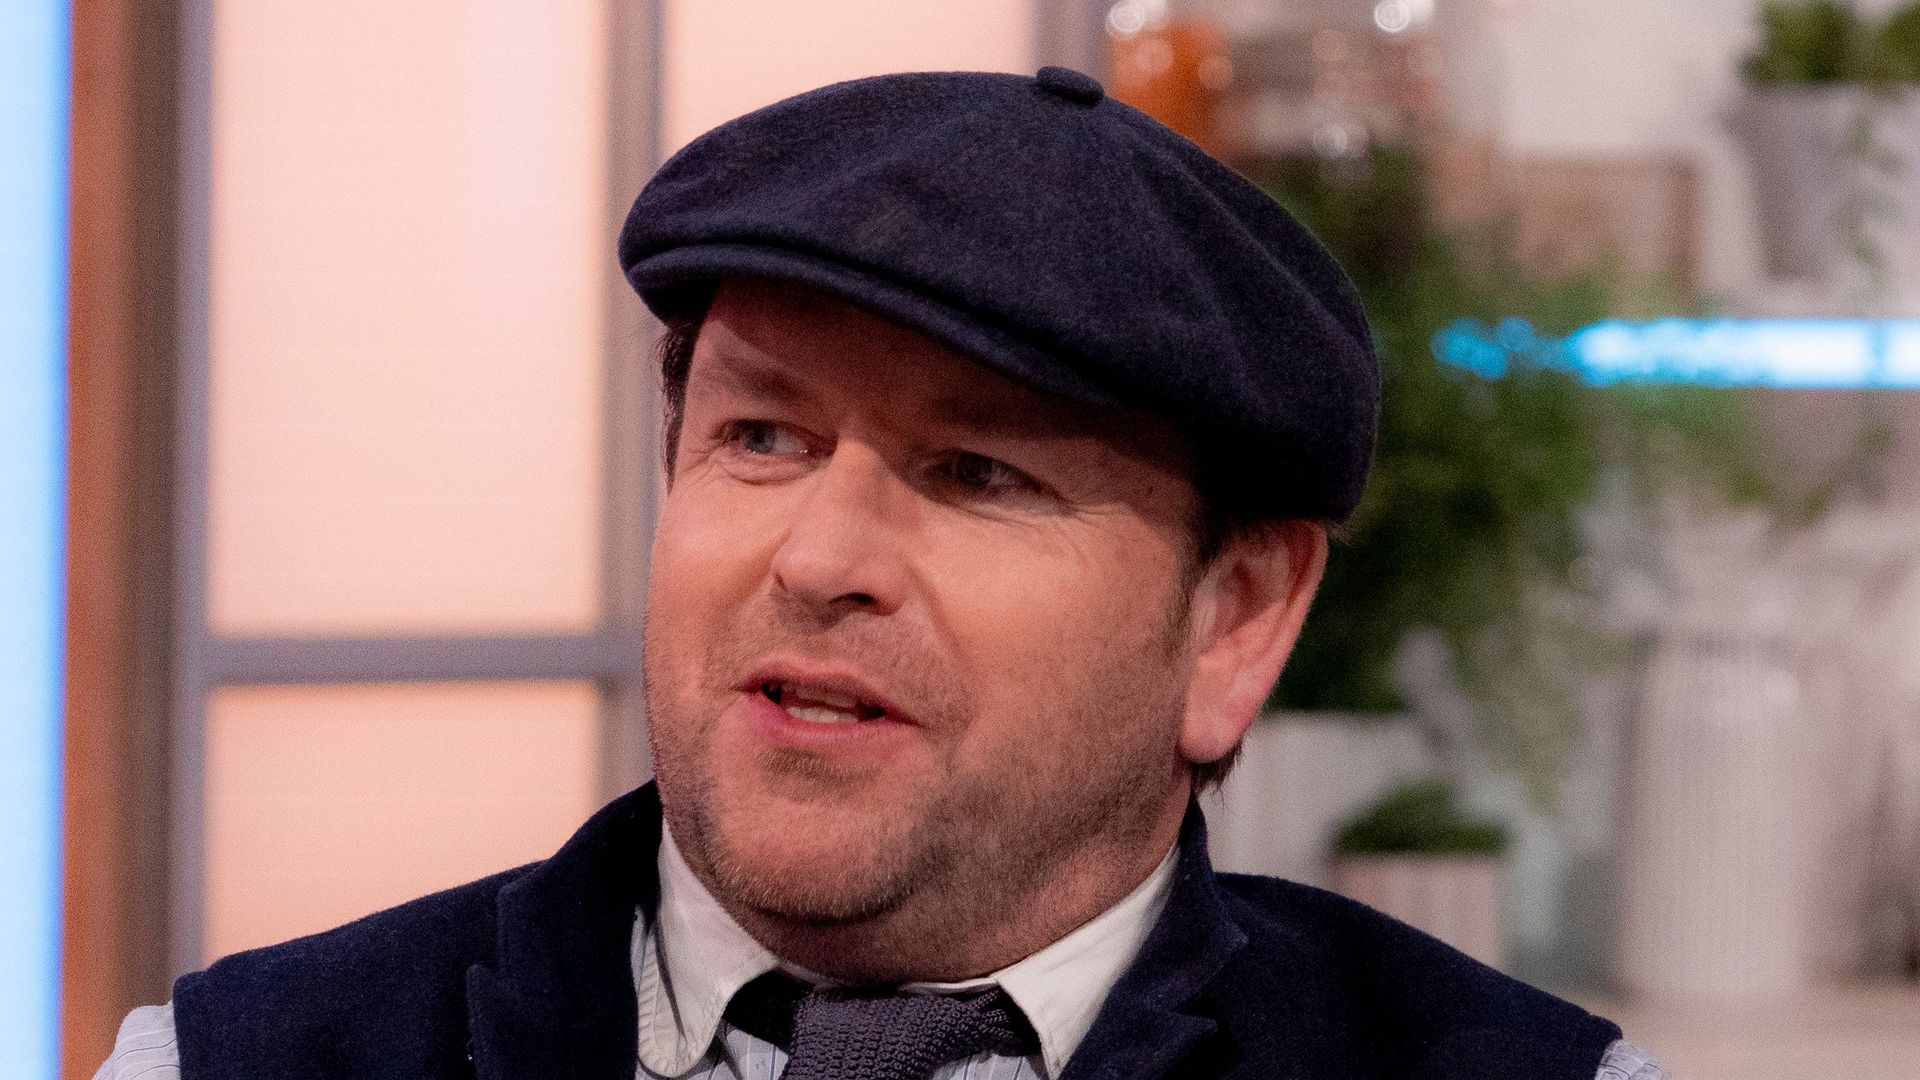 man talking on chat show in waistcoat and hat